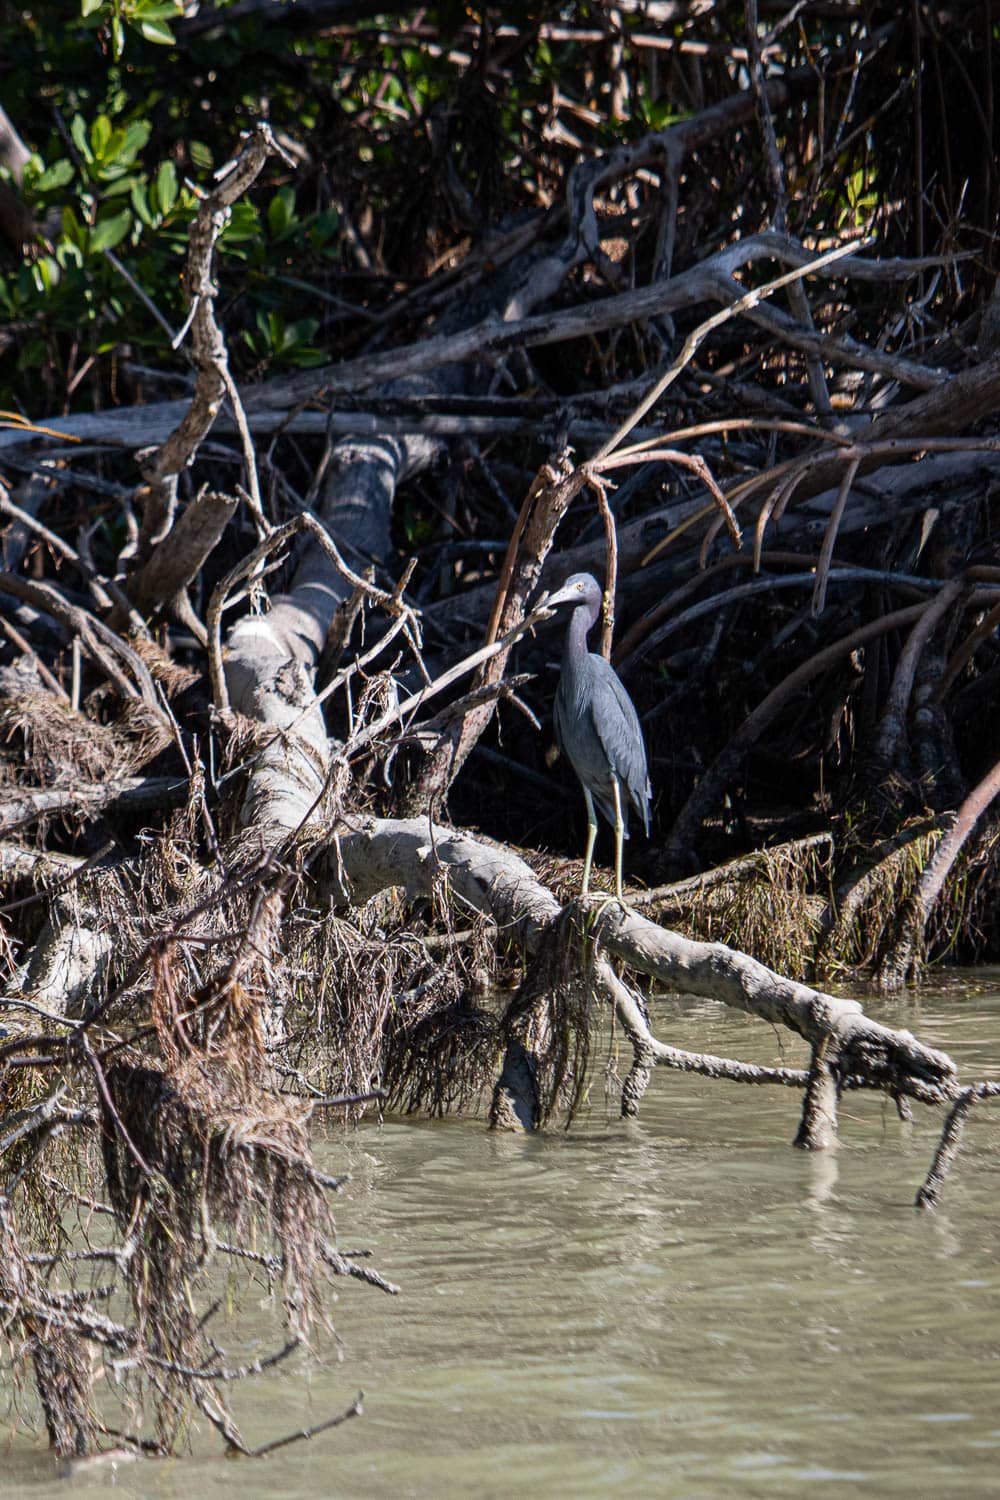 A little blue heron stands on a log in the mangroves of Flamingo, Everglades National Park